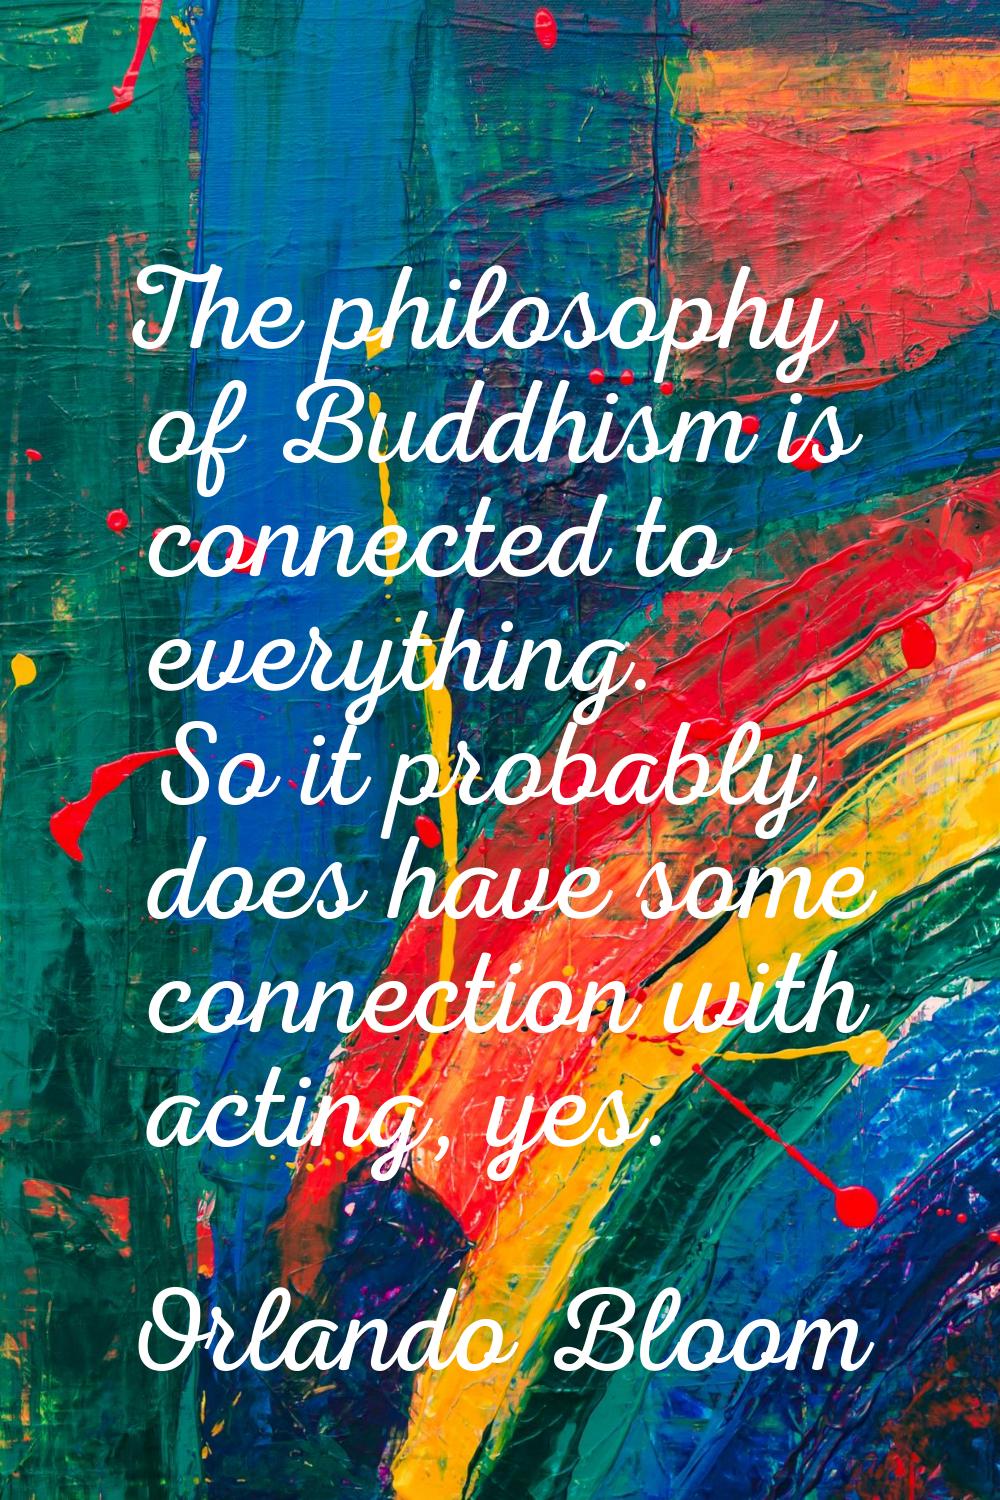 The philosophy of Buddhism is connected to everything. So it probably does have some connection wit